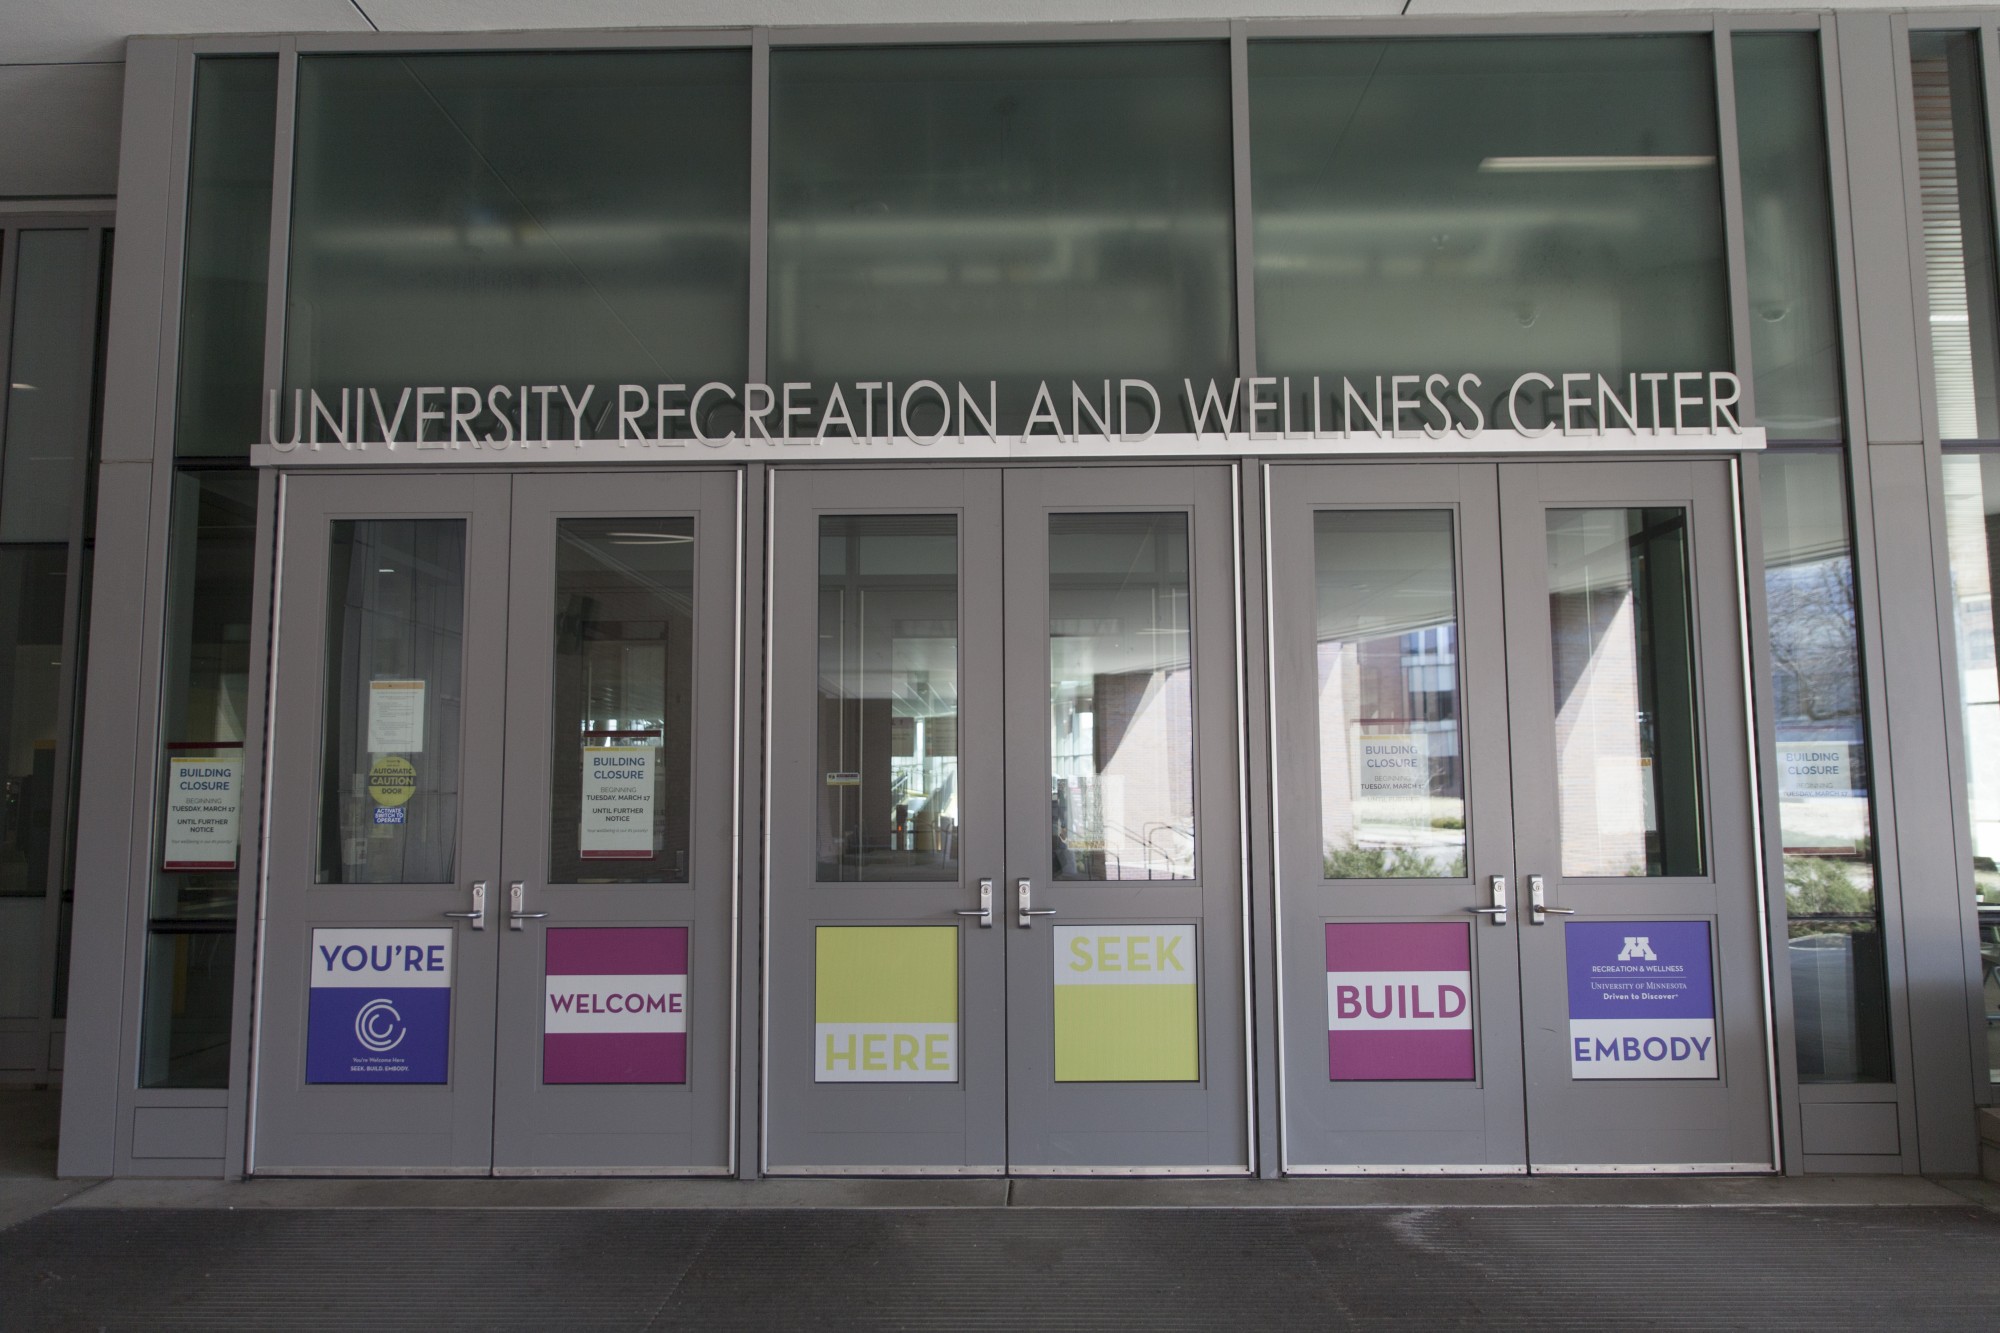 The entrance of the University Recreation and Wellness Center on Saturday, March 21, 2020.